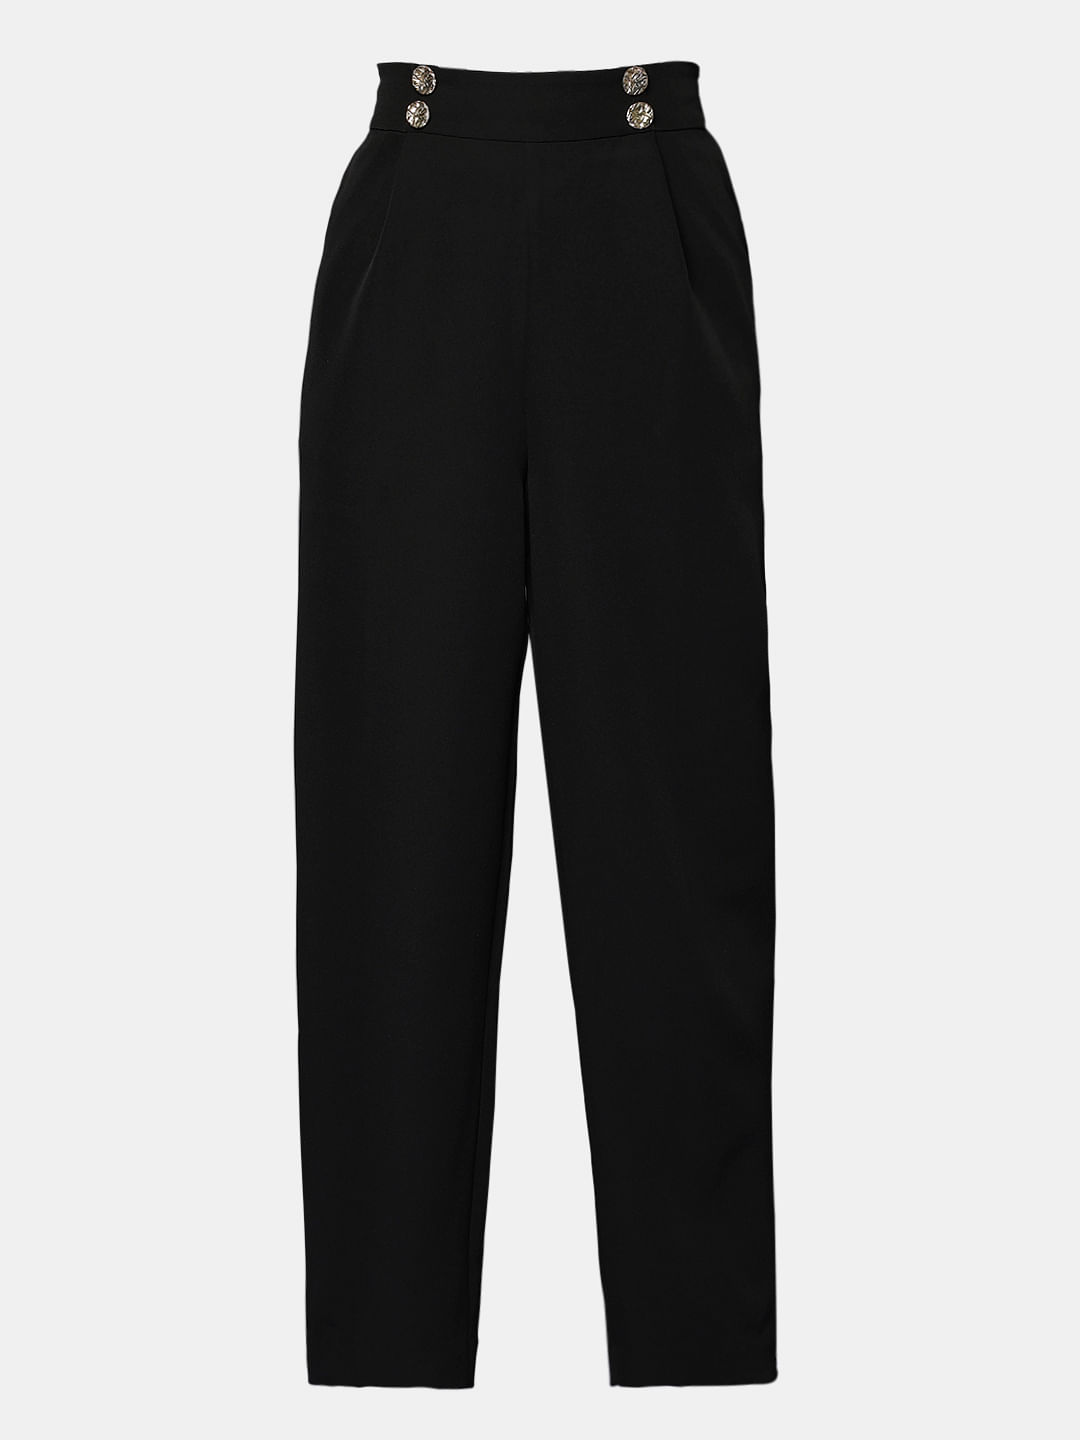 Women's Cropped Work Pants & Trousers | Nordstrom Rack